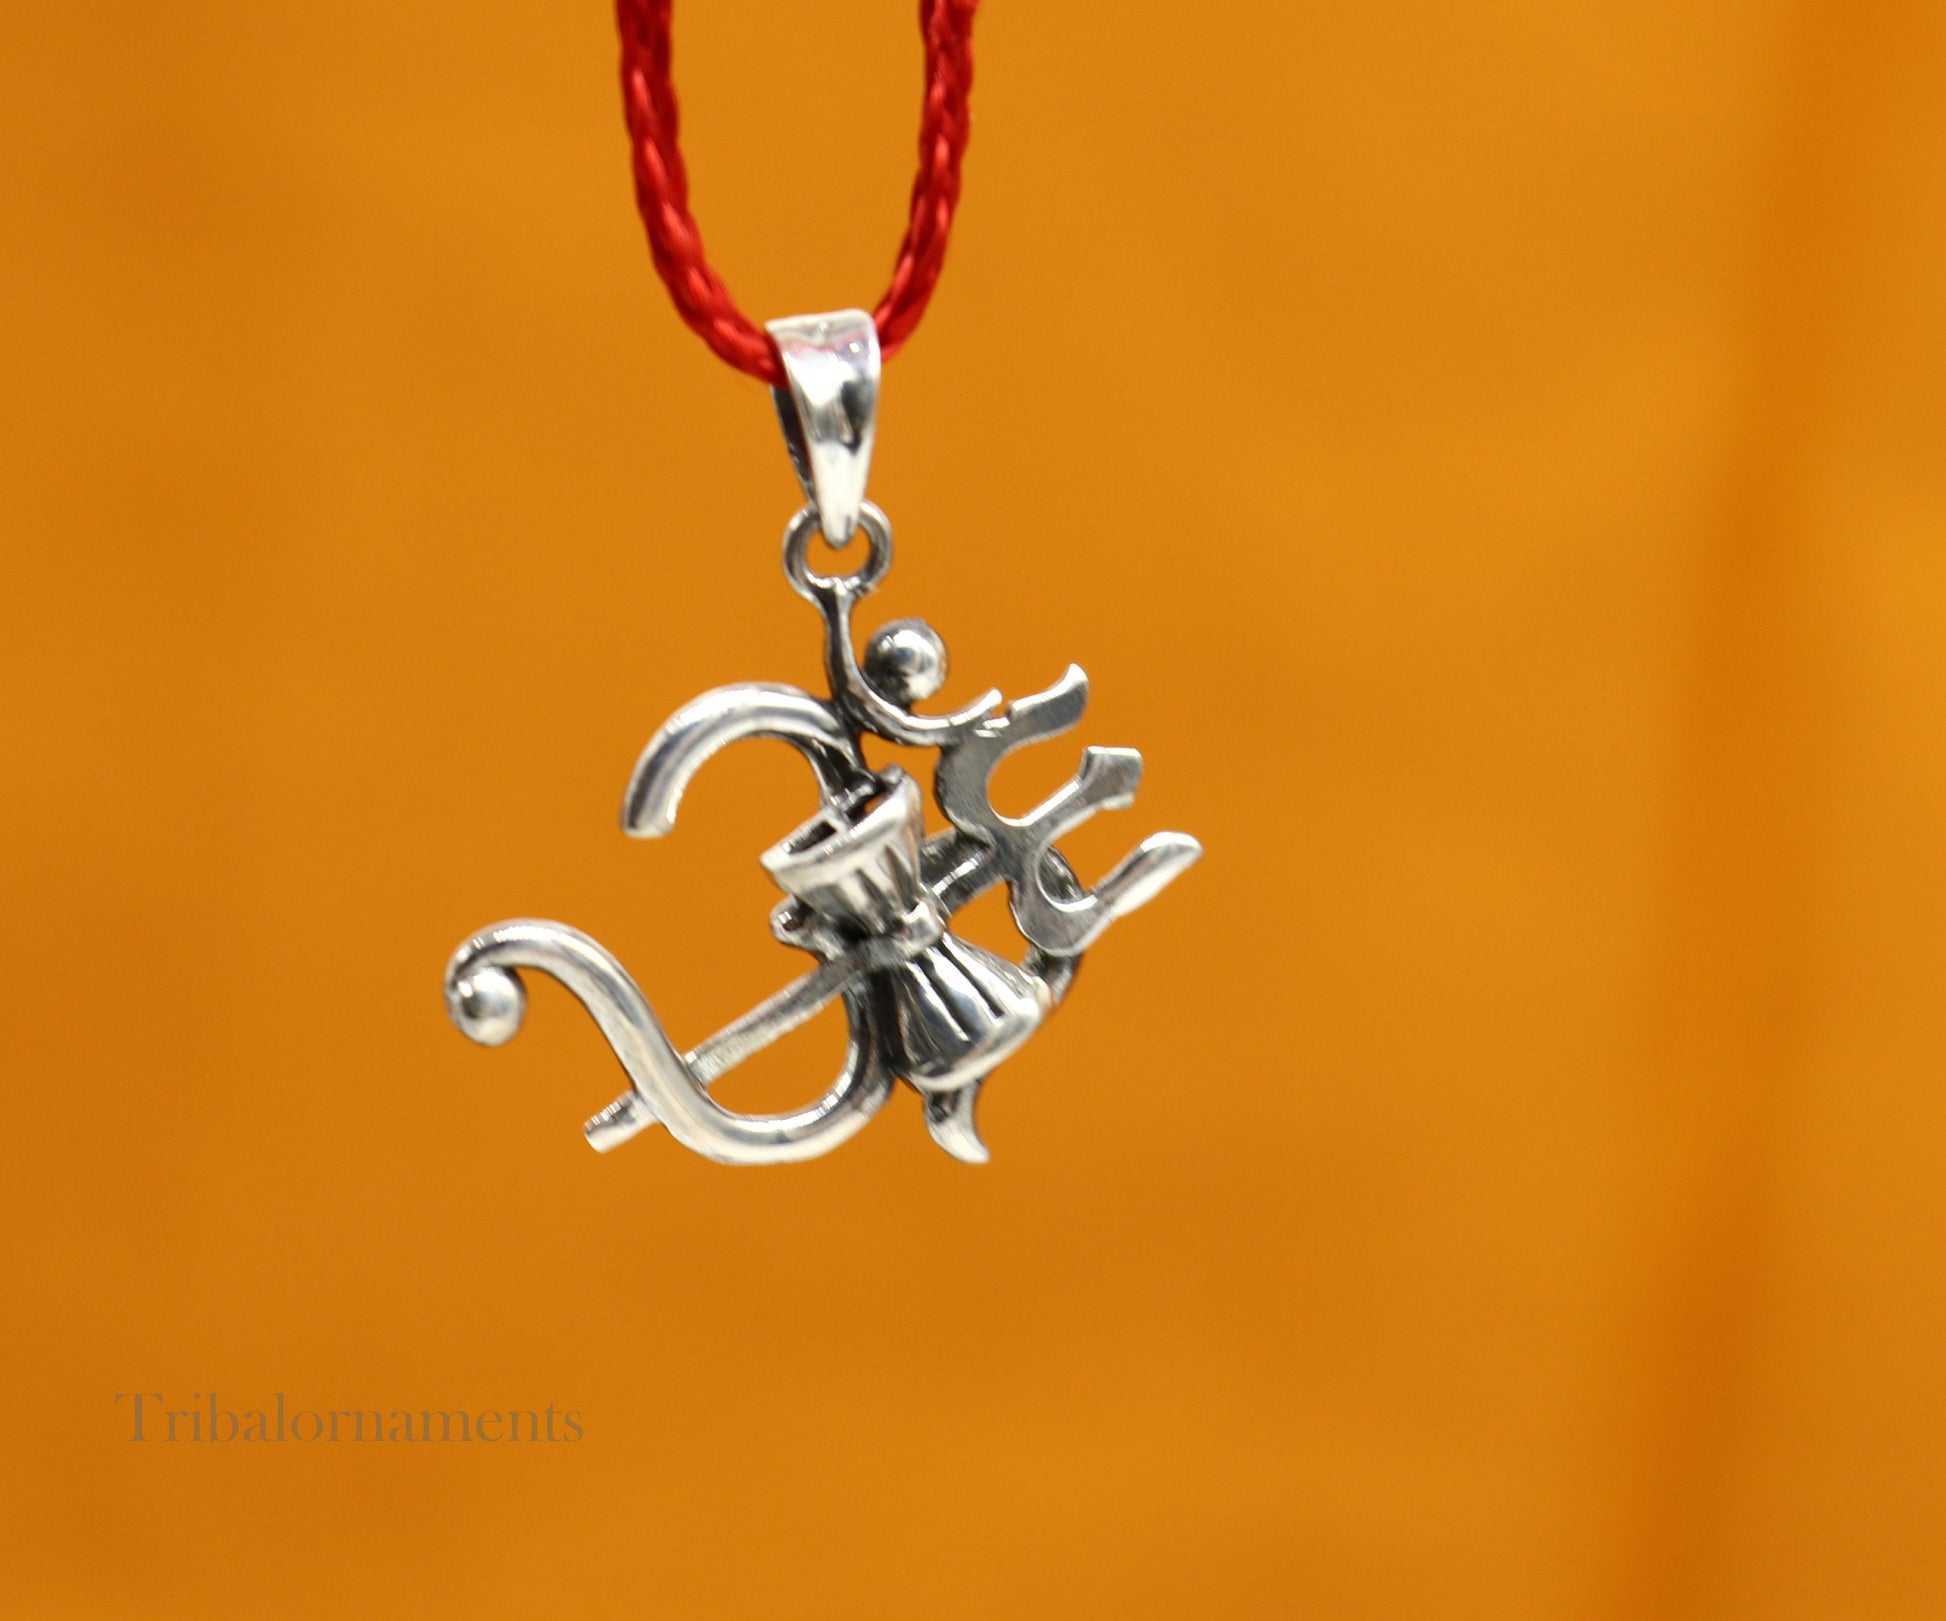 925 sterling silver vintage antique style Aum with trident shiva Pendant, amazing design stunning pendant unisex gifting jewelry ssp964 - TRIBAL ORNAMENTS